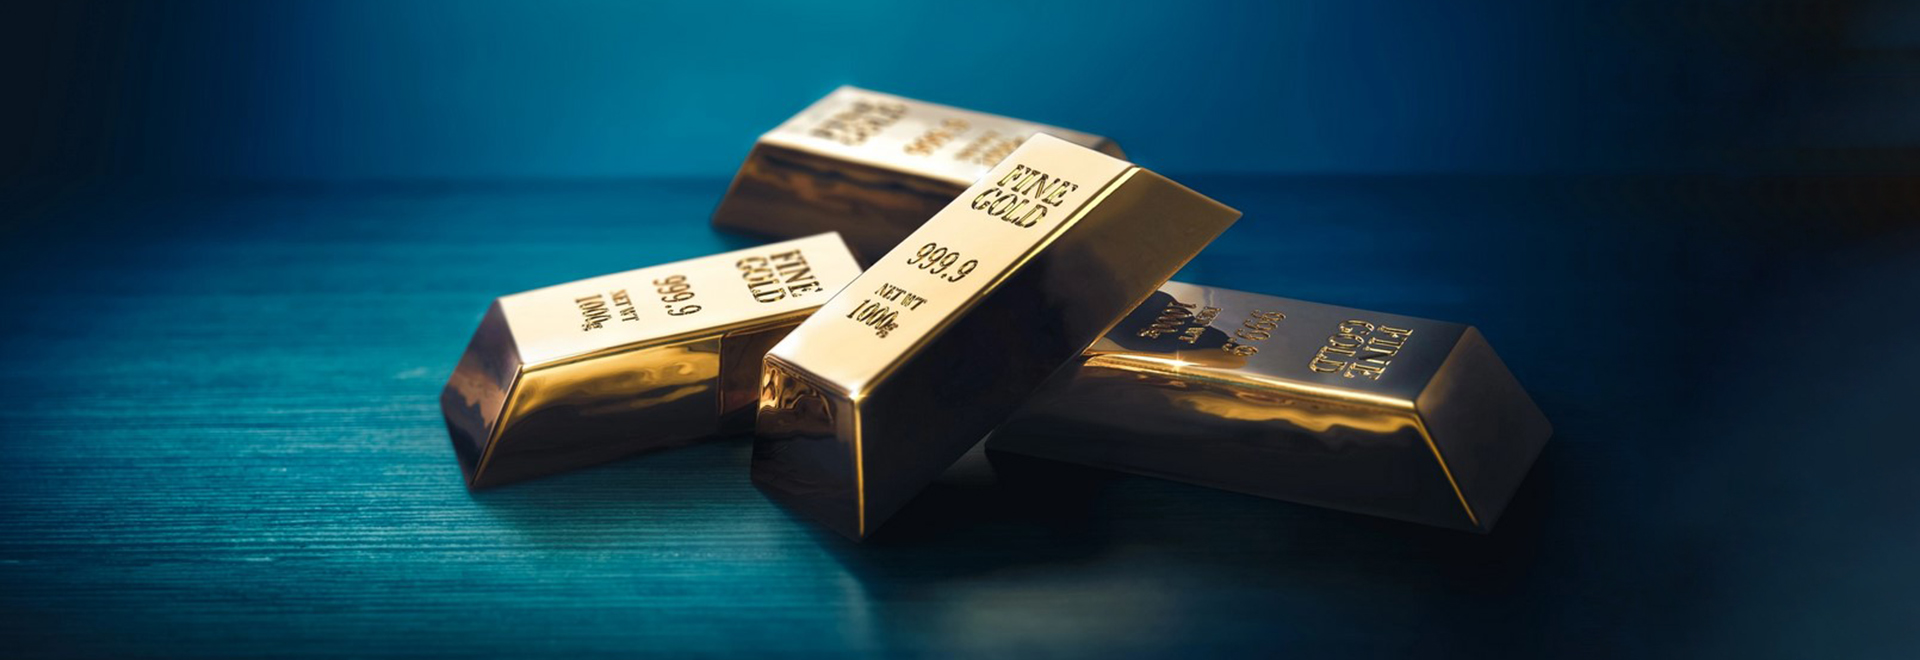 Gold prices have fallen due to the strengthening of the U.S. dollar